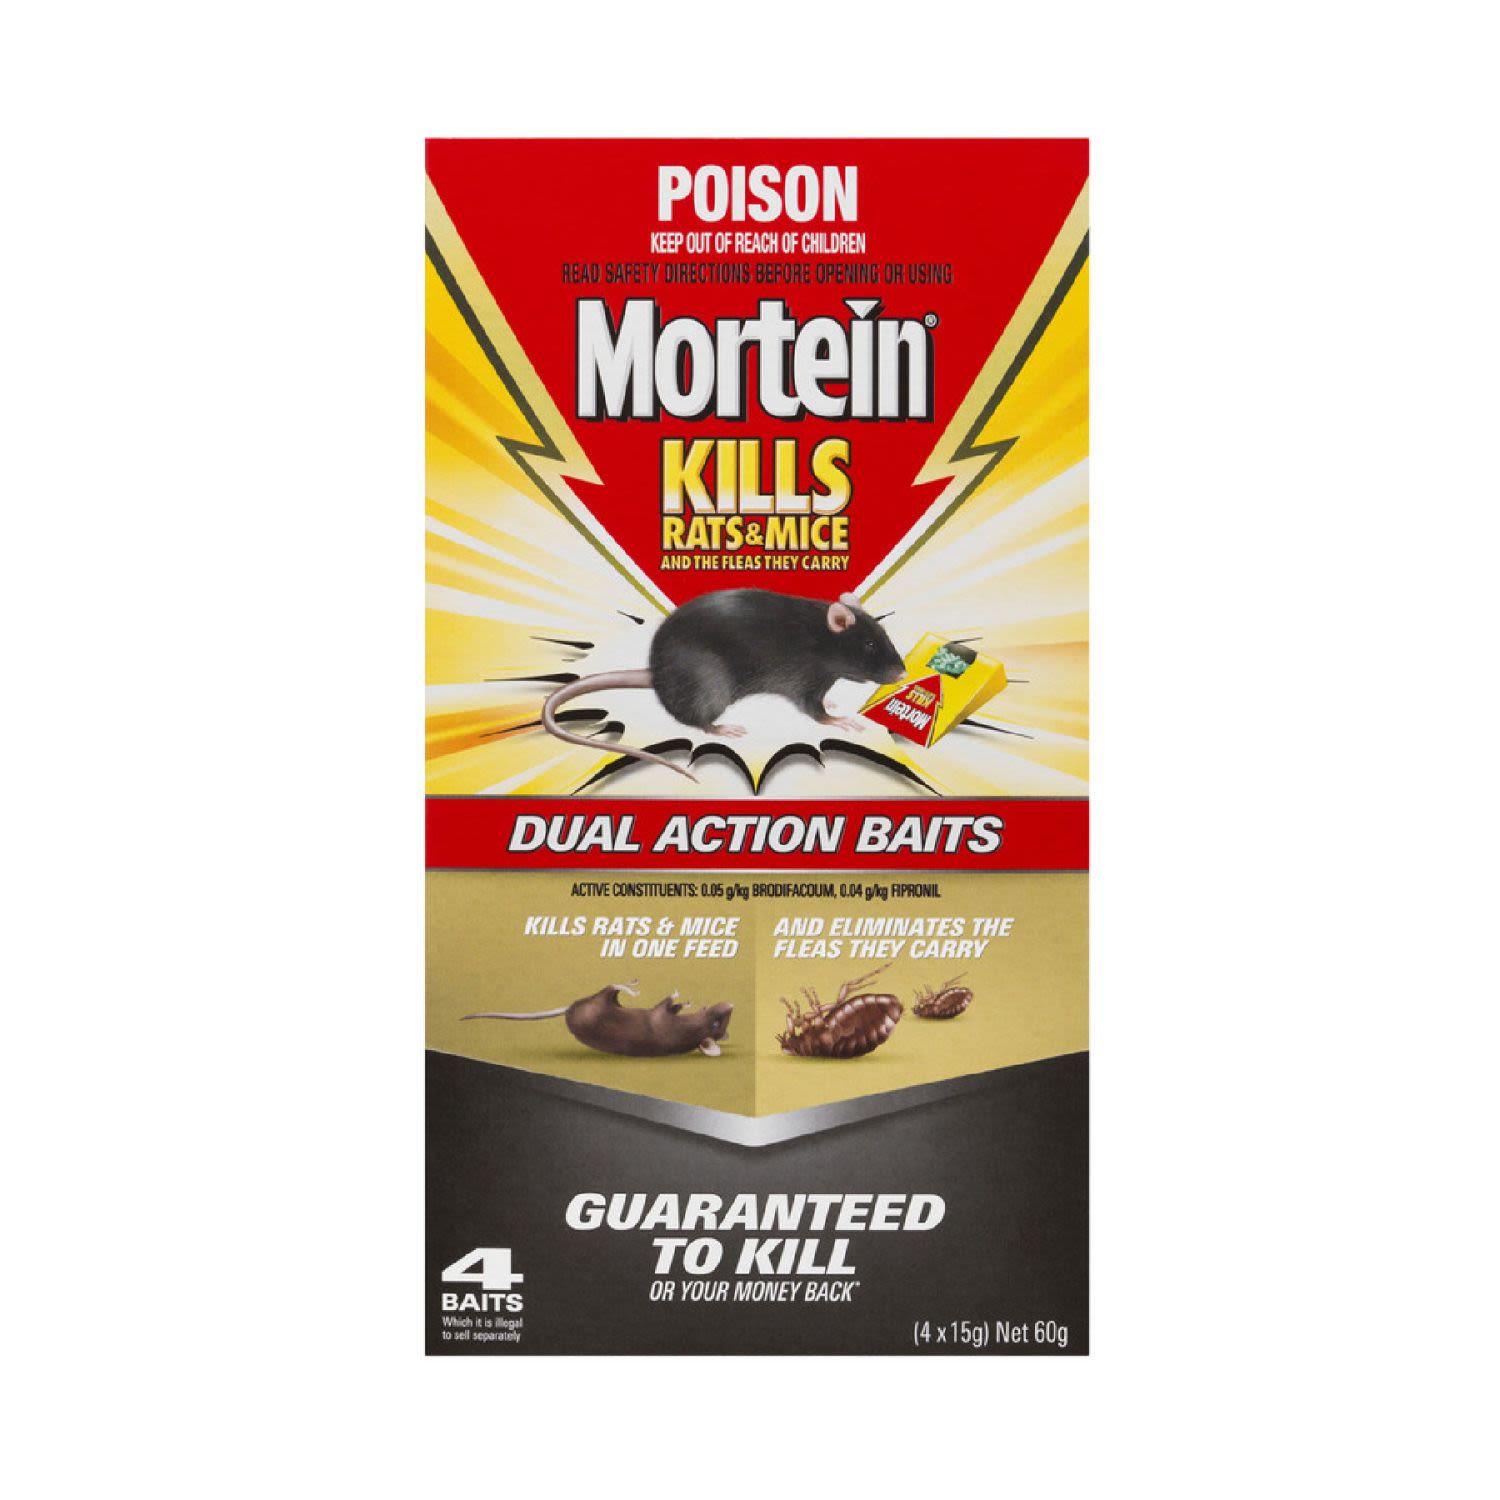 Mortein Rat Kills & Mice Dual Action Baits 4 Pack, 4 Each